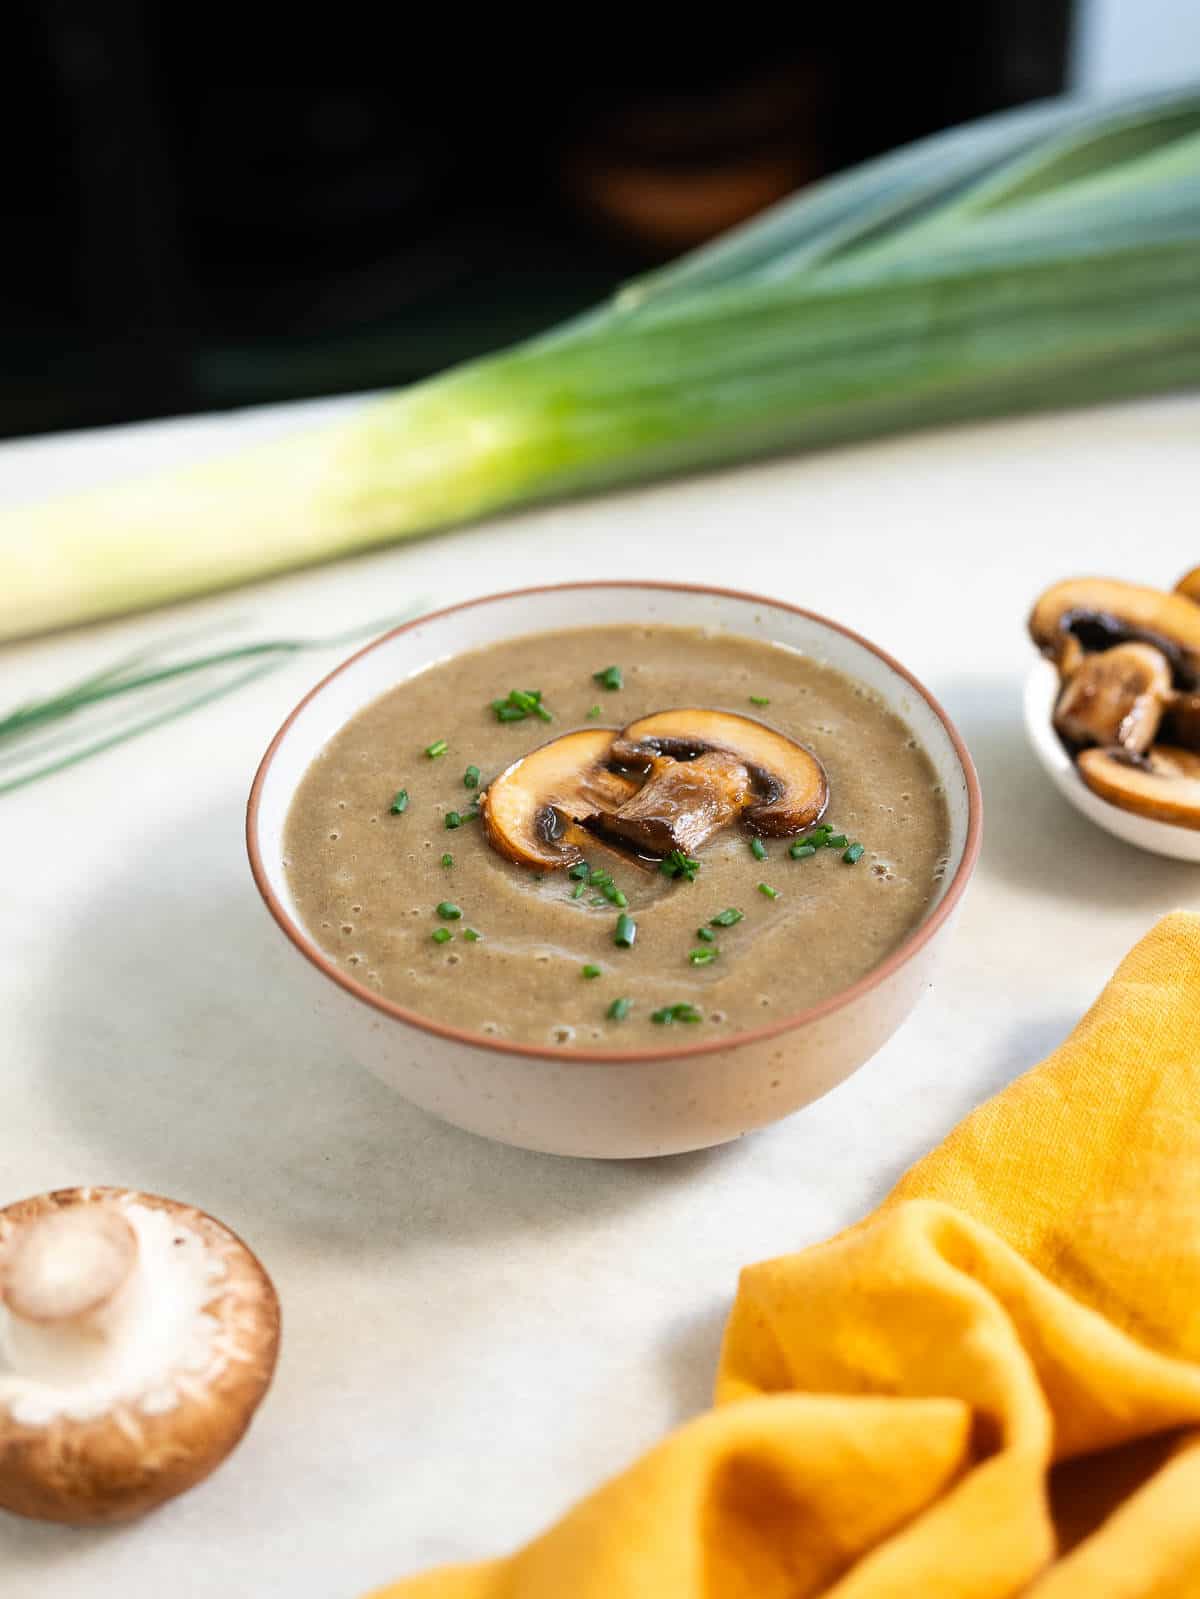 table with a whole leek, small bowl served with mushroom soup without cream garnished with browned mushroom slices and thinly chopped chives.